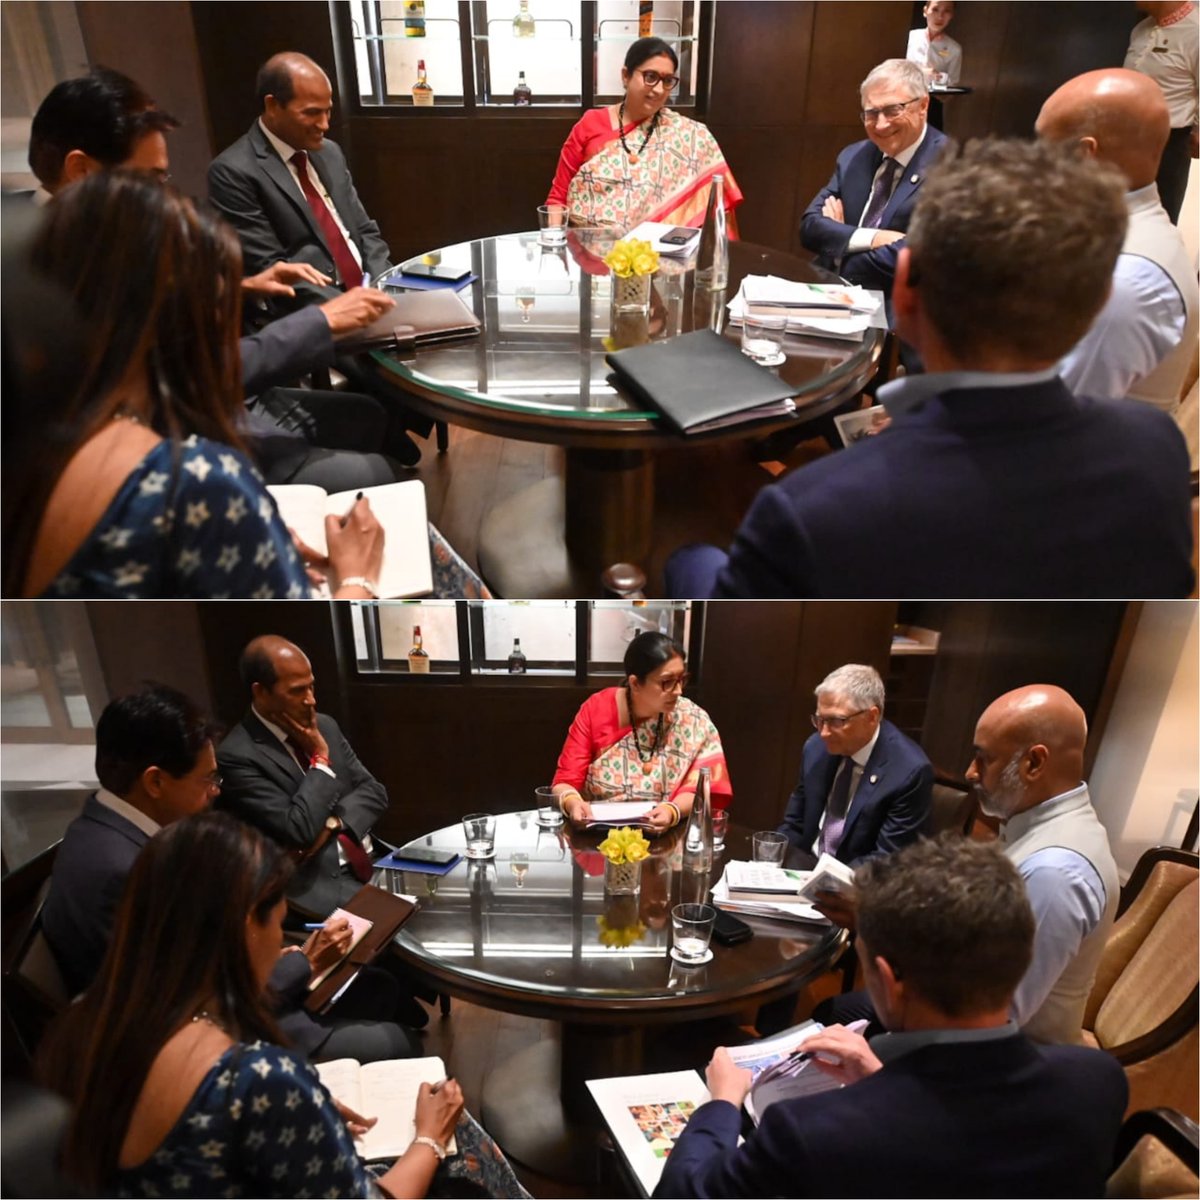 Minister @smritiirani in an engaging discussion with Mr. @BillGates. Deliberations were held on creative strategies to maximize the impact of Poshan Abhiyaan, ensuring optimal nutrition for our children & realising PM @NarendraModi ji’s vision of a Suposhit Bharat.